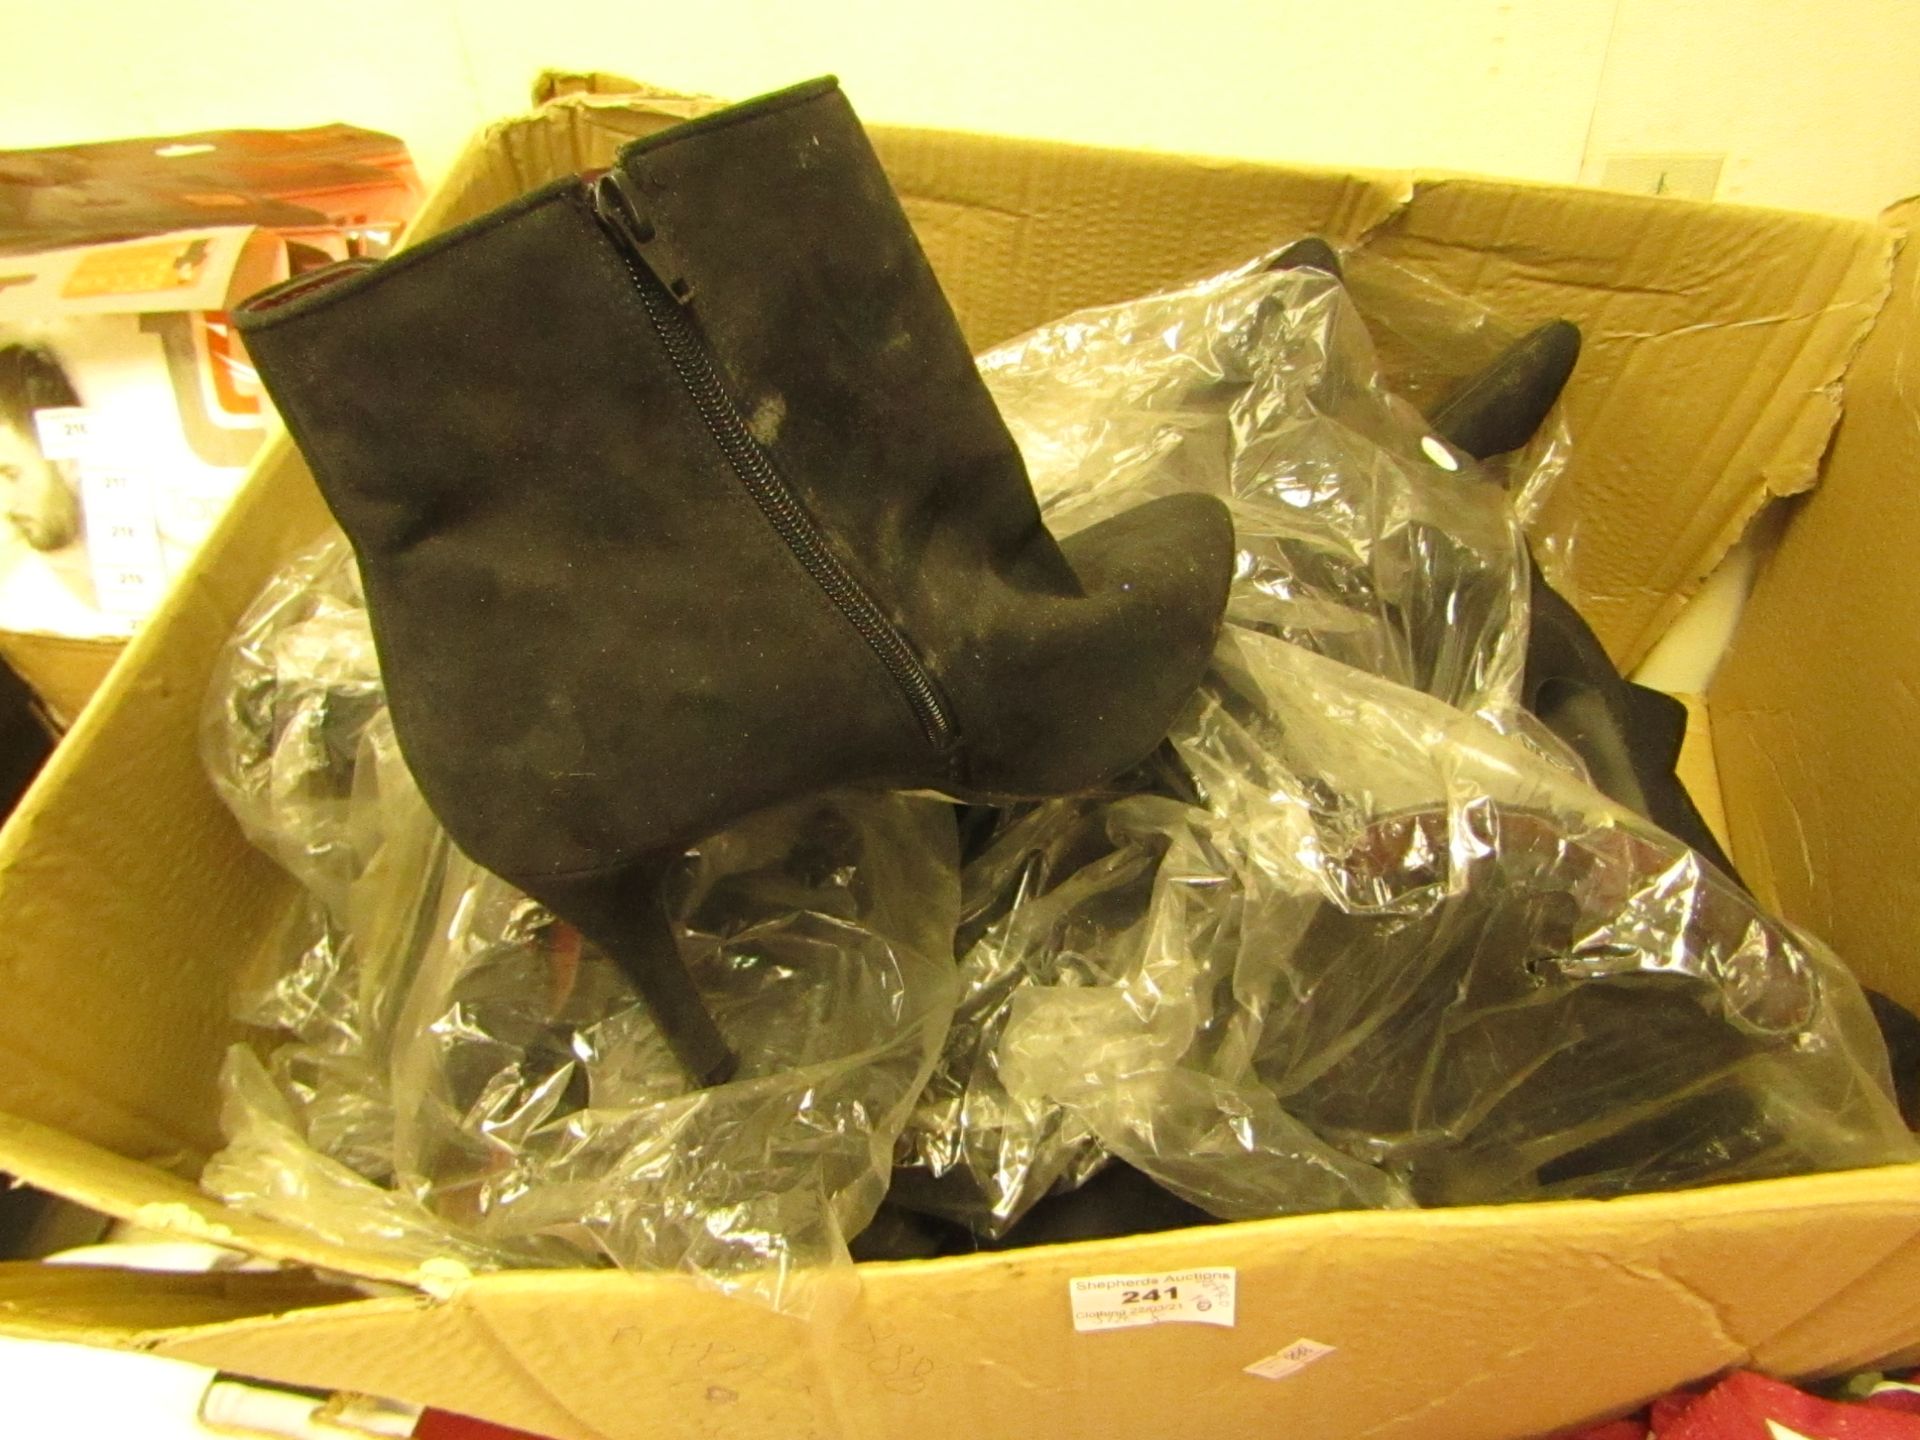 Approx 10 size 8 Ladies Black heel boots look new some damaged & packaged